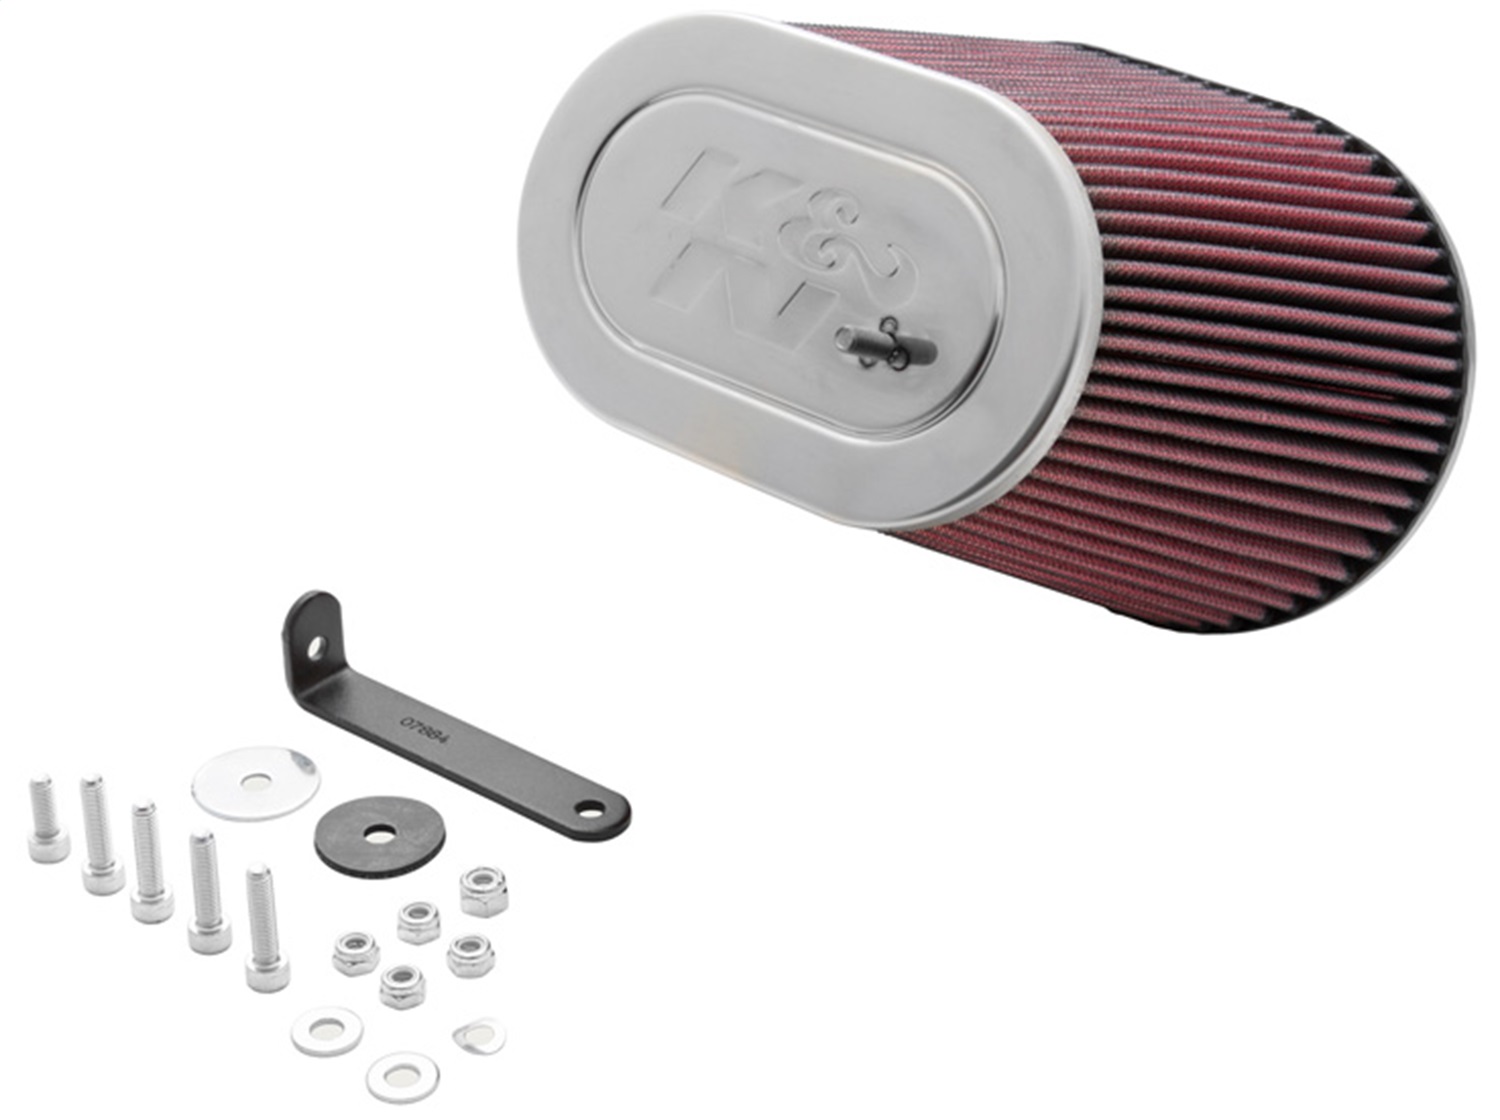 K&N Filters K&N Filters 57-5504-1 Filtercharger Injection Performance Kit Fits Eclipse Talon